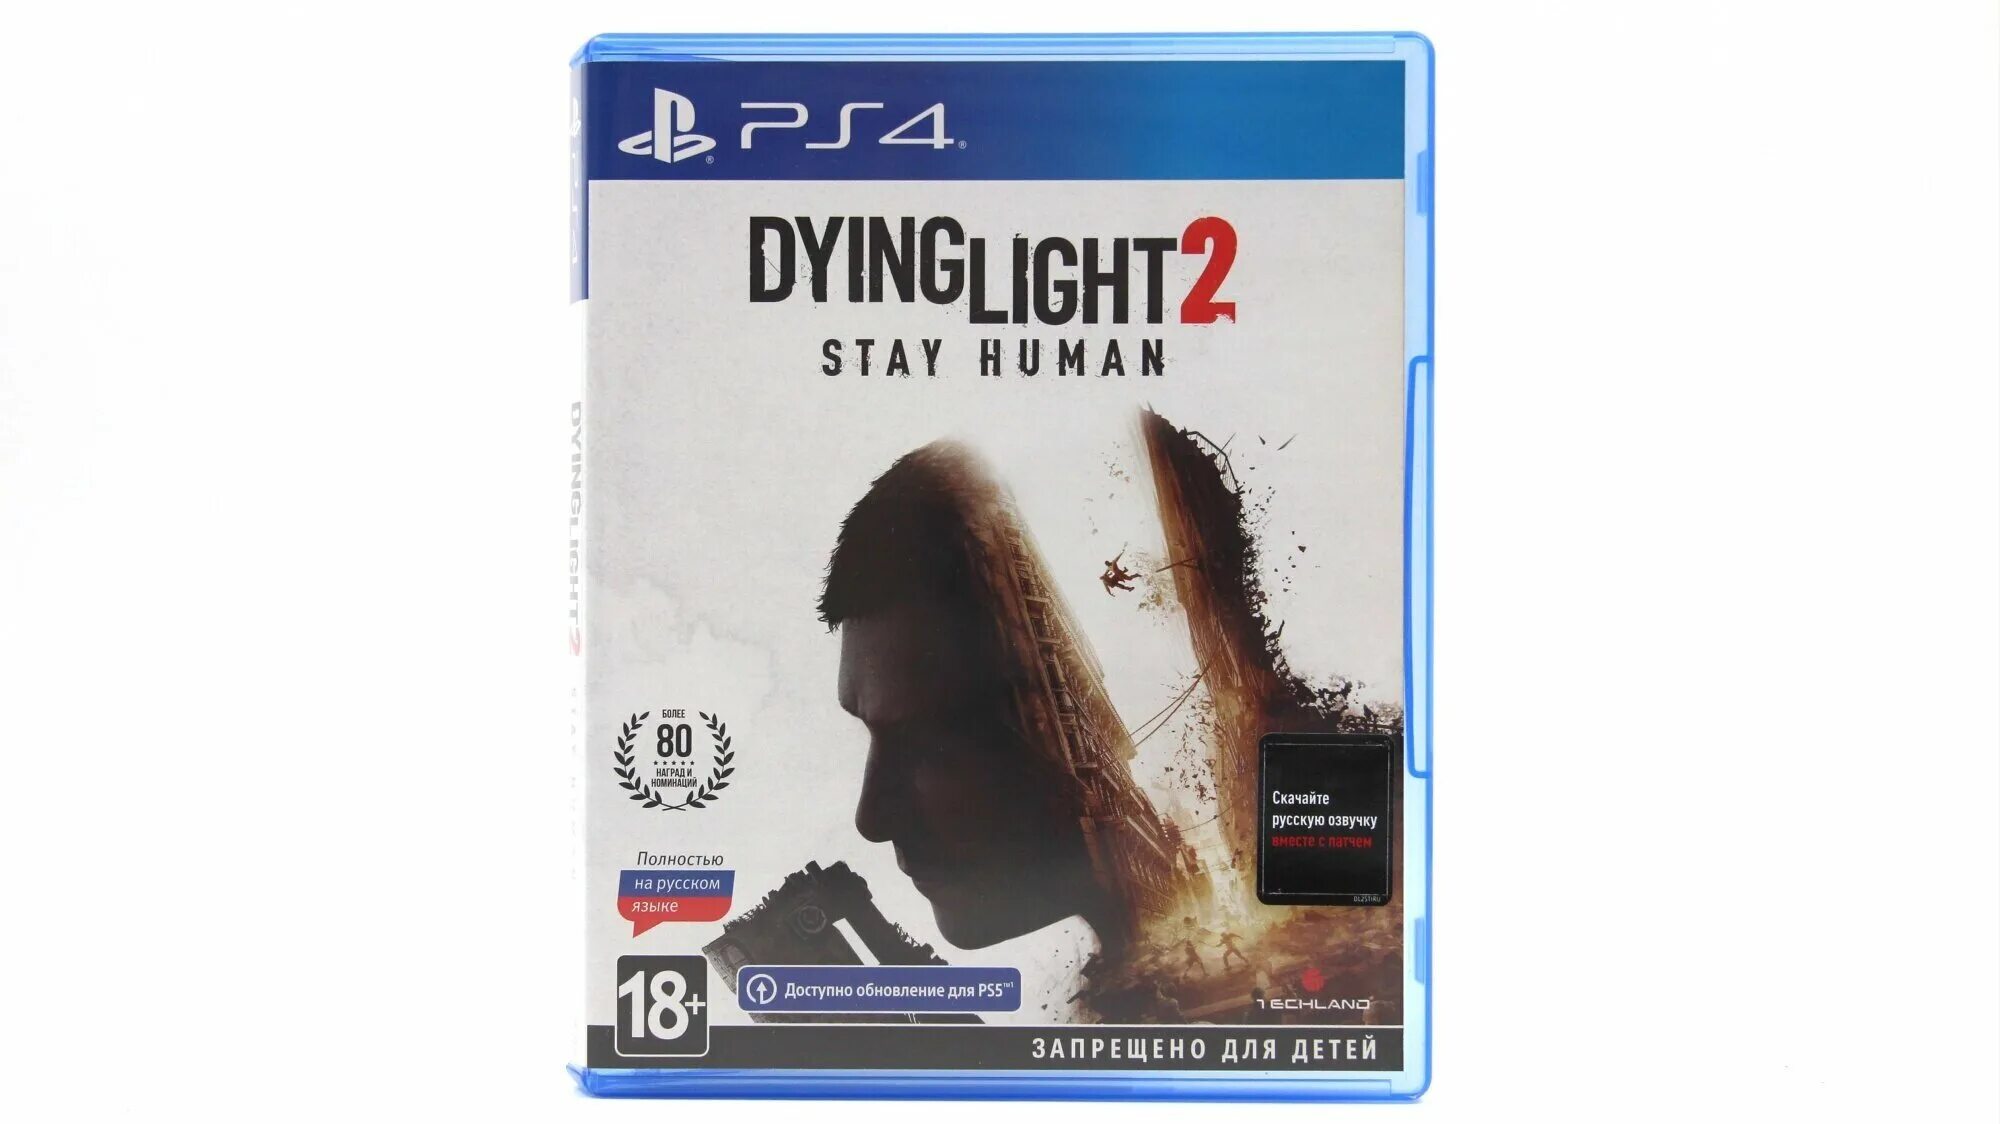 Dying Light 2 stay Human [ps4, русская версия]. Dying Light 2: stay Human Ultimate Edition ps4. Dying Light 2 stay Human обложка.